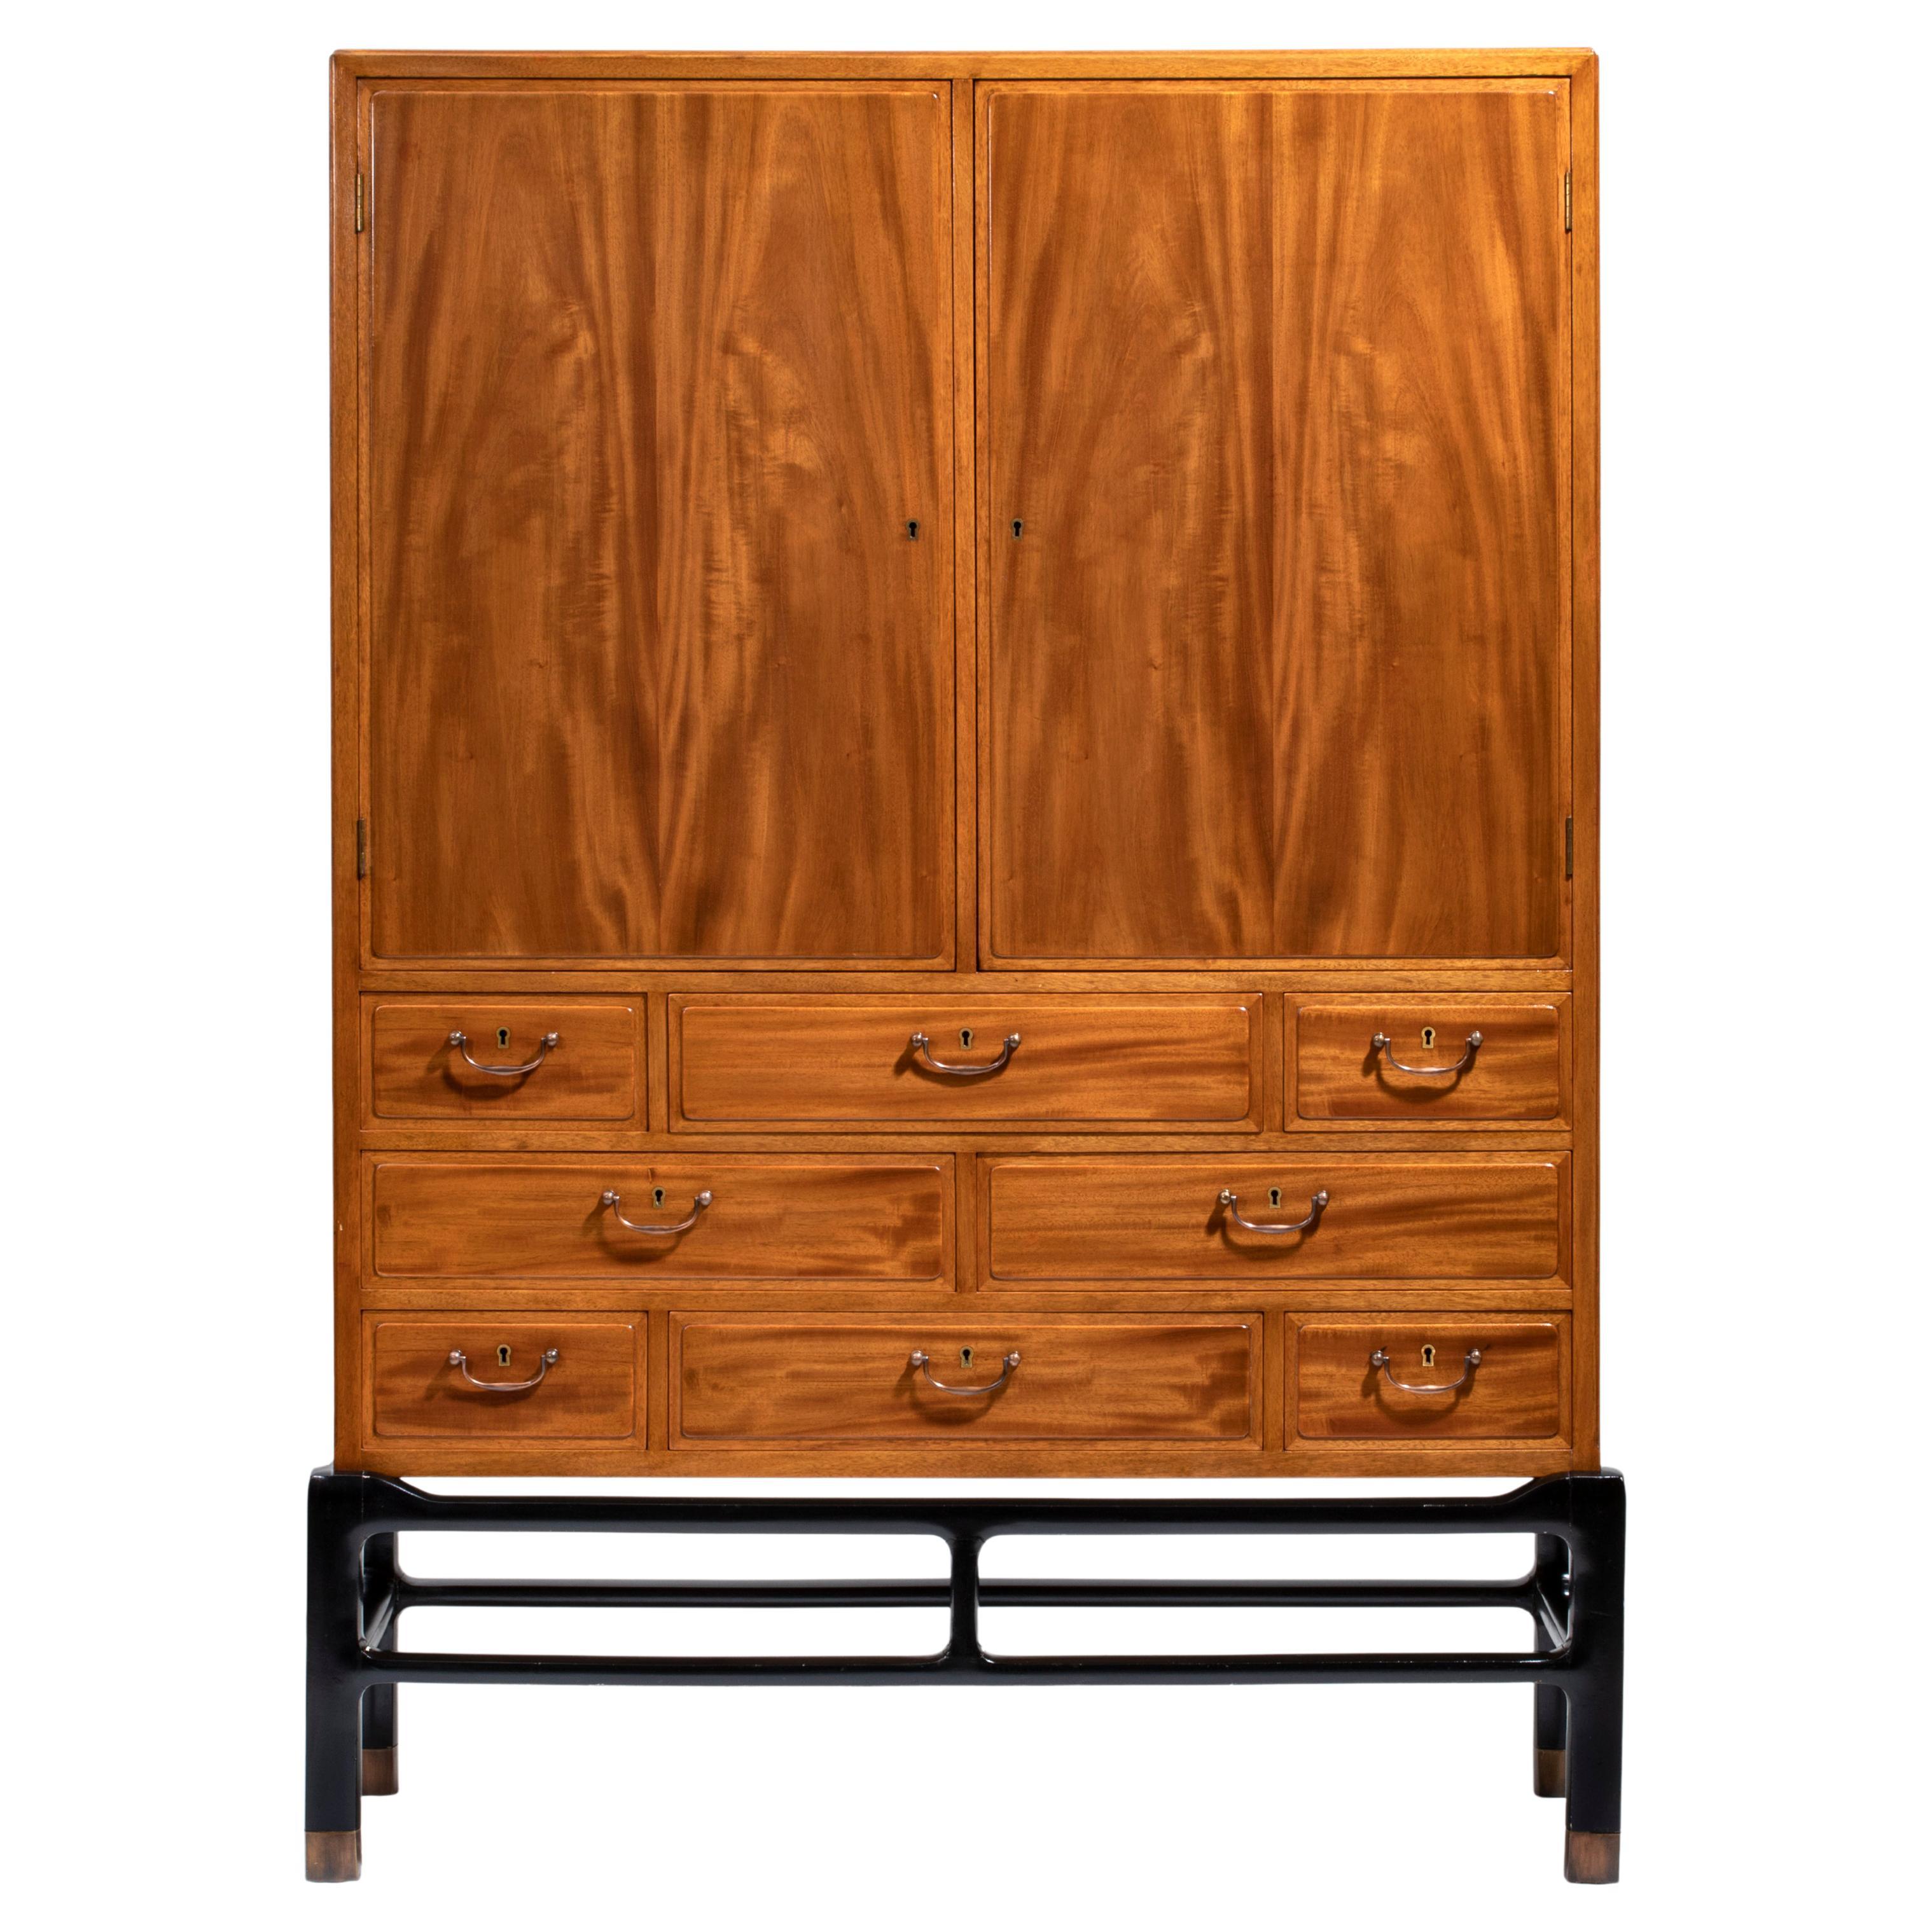 Jørgen Berg, An Exceptional Danish Mahogany, Lacquered & Patinated Brass Cabinet For Sale